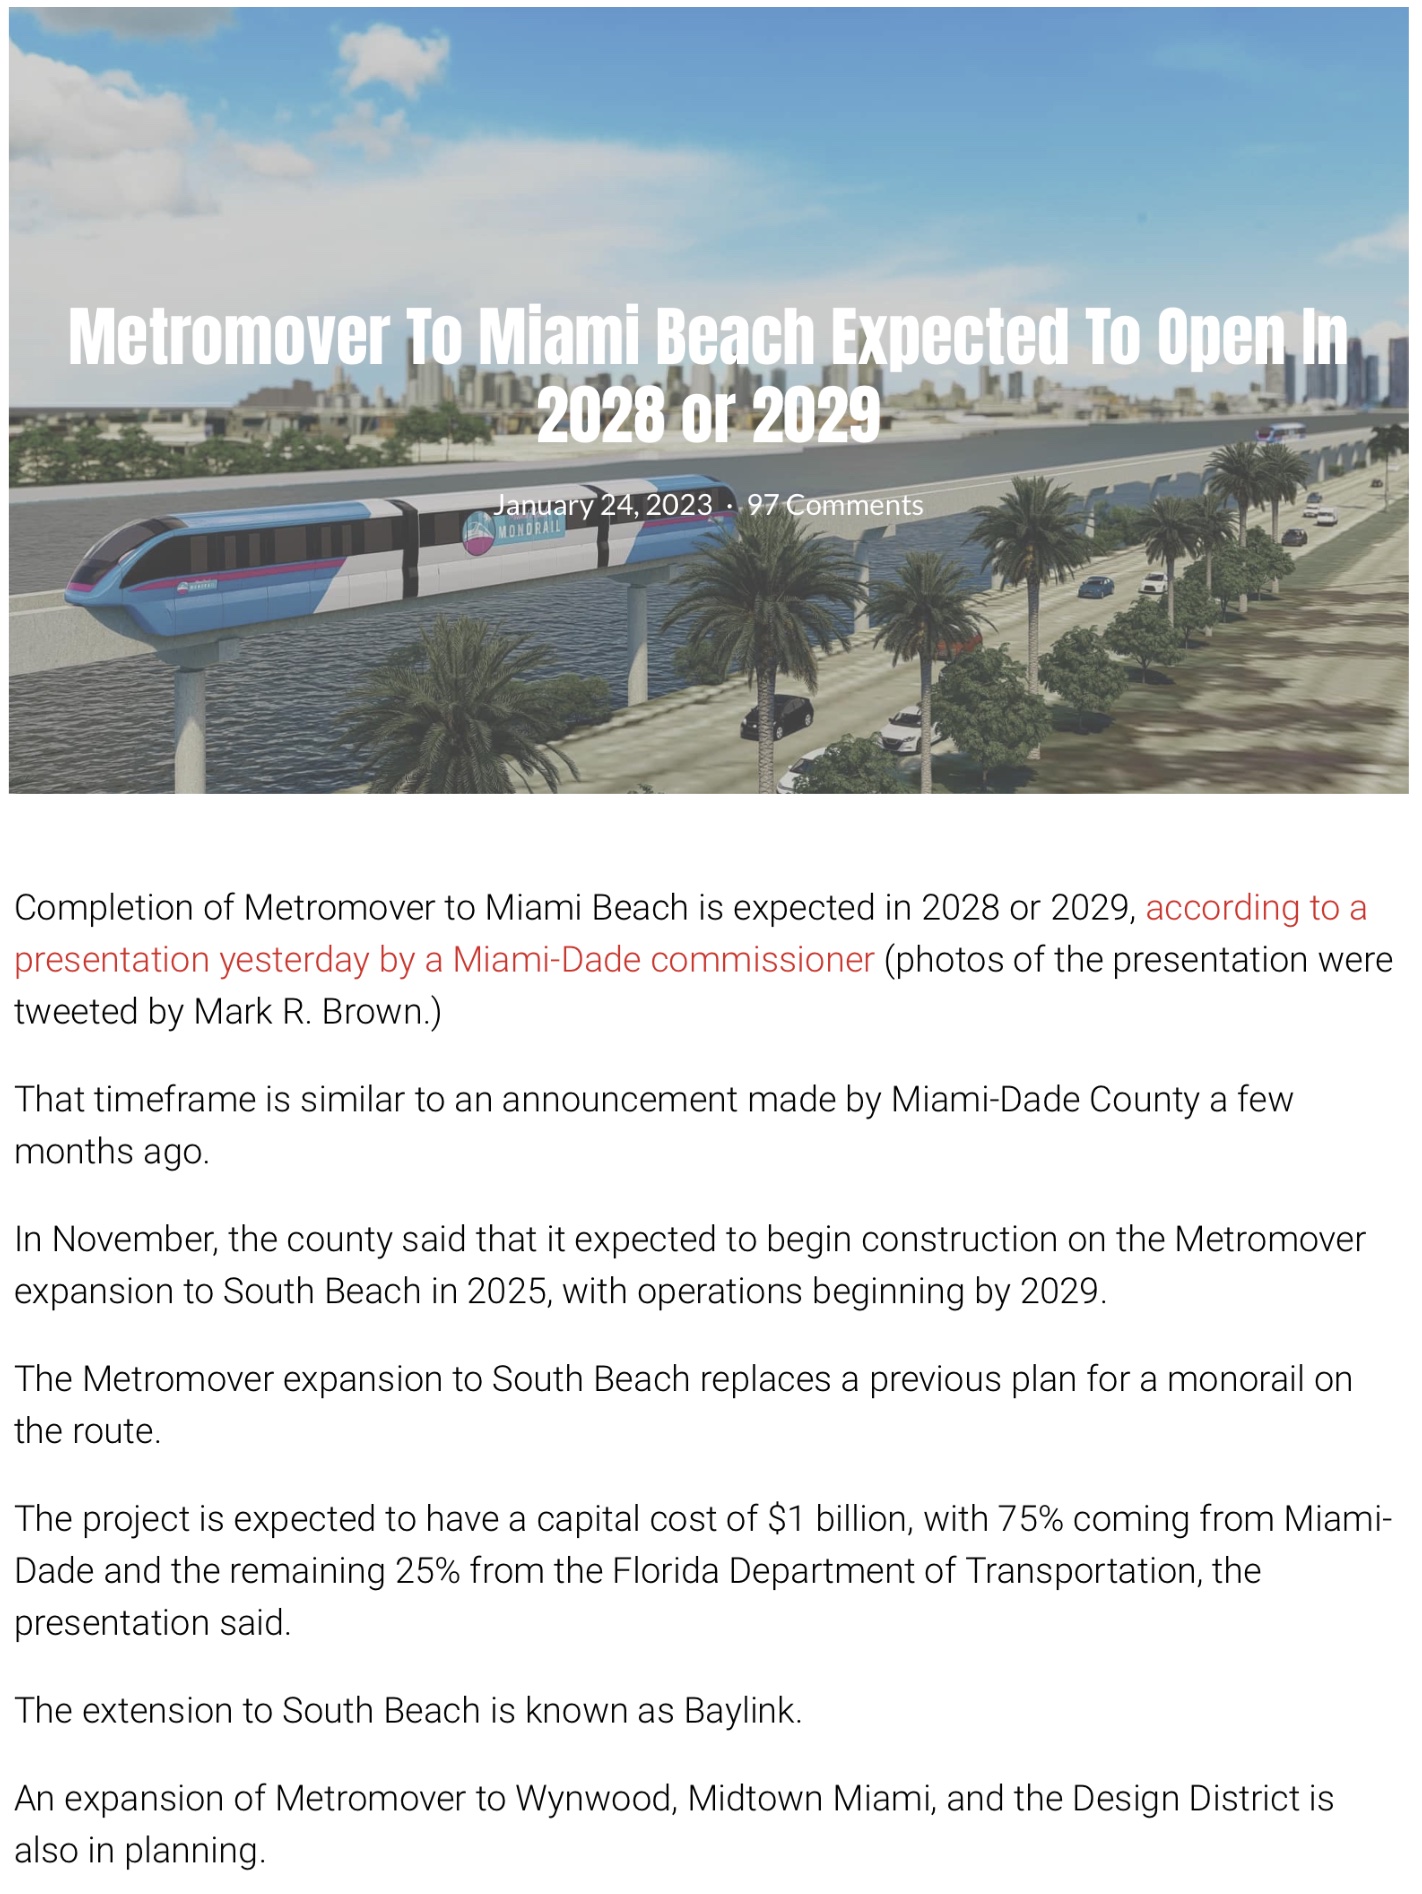 Metromover To Miami Beach Expected To Open In 2028 or 2029